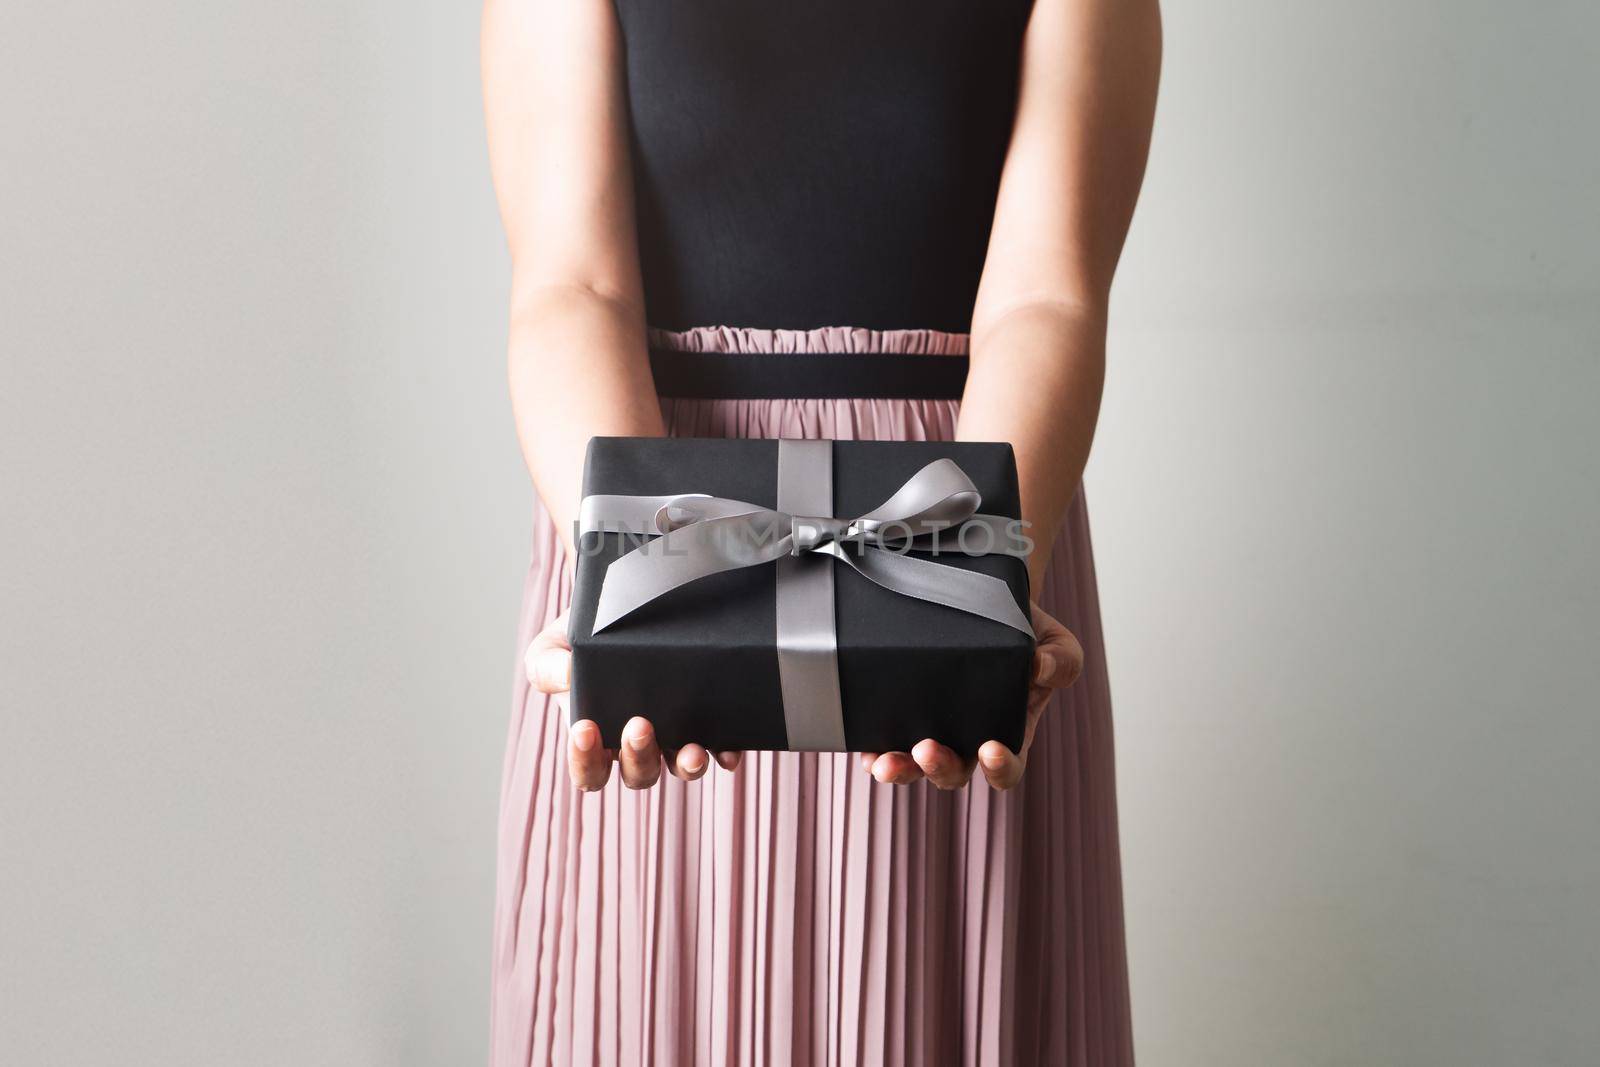 Boxing Day sale, young woman hold a gift box offer to receiver by psodaz